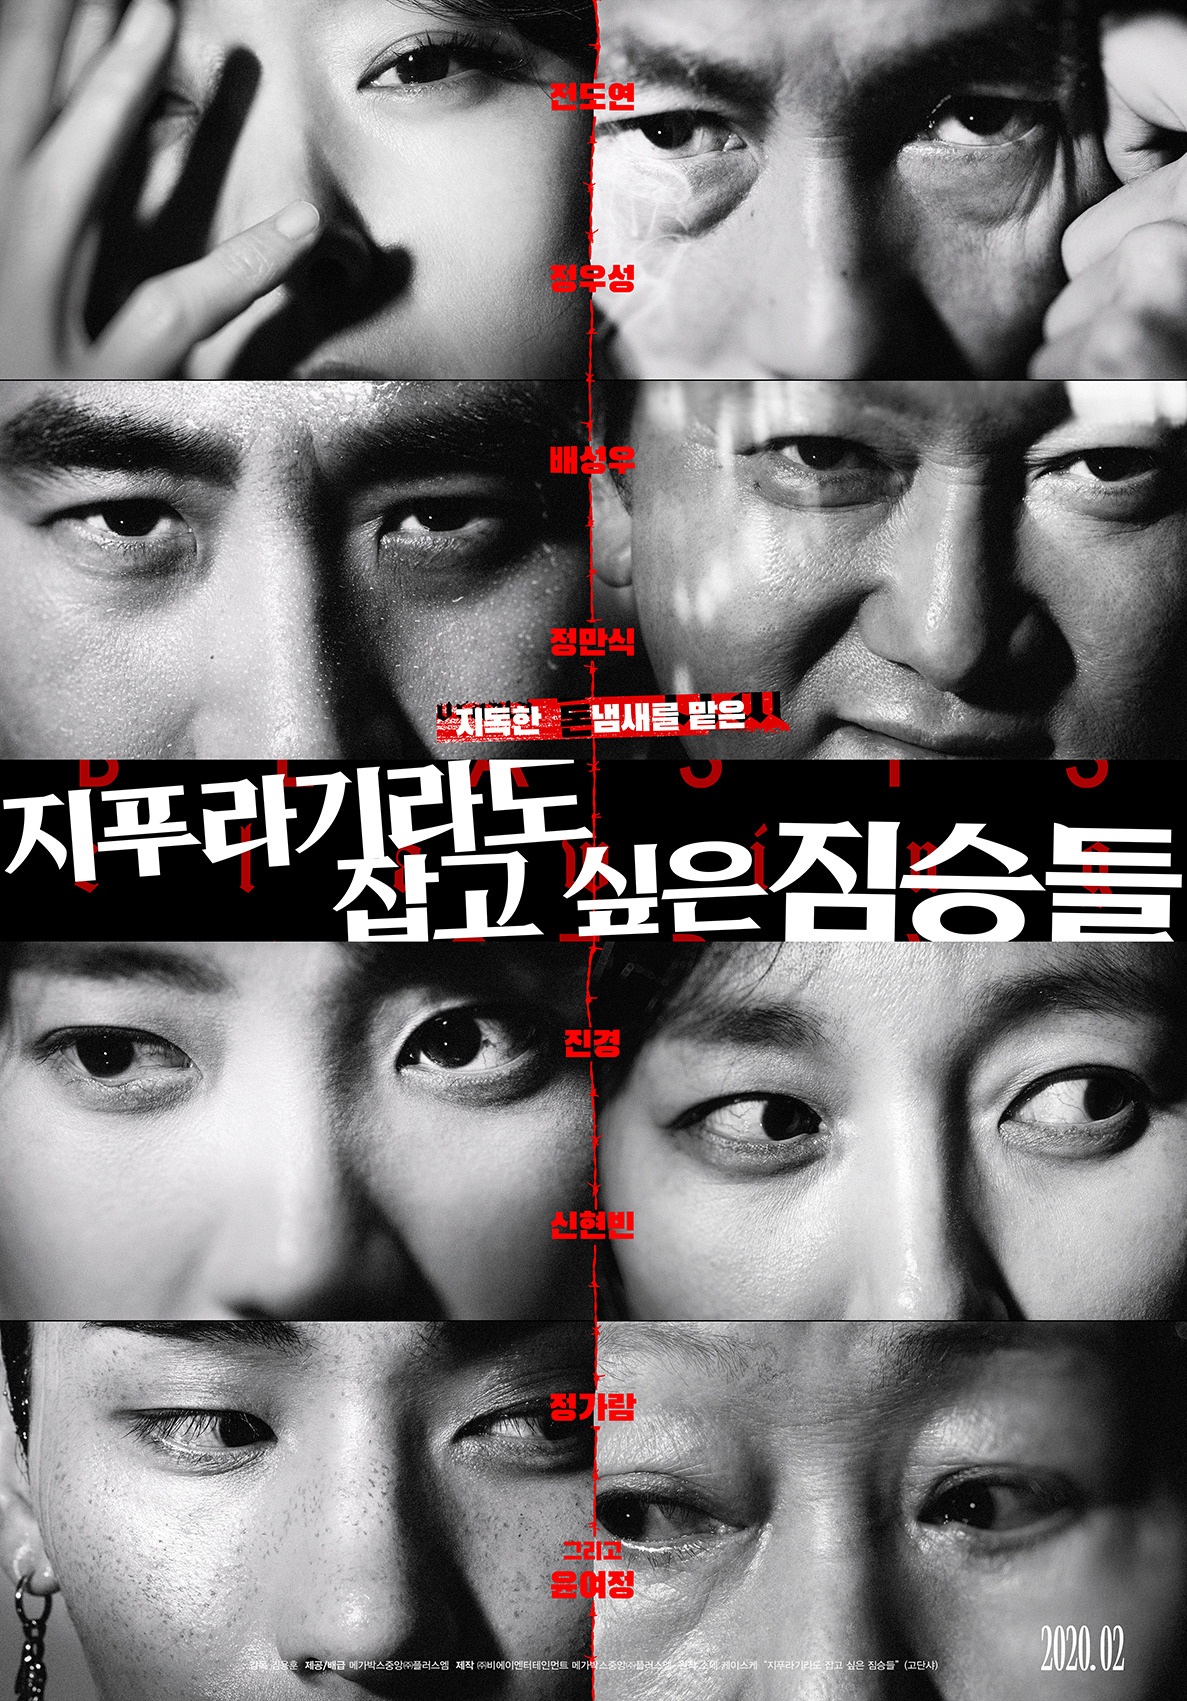 February ReleasedThe Beasts who want to catch straw is a hard-boiled crime drama of ordinary humans planning the worst of the worst to take the last chance of life, the money bag, and it was confirmed to be released in Korea next February.Especially, The beasts who want to catch even the straw is a work that is expected to meet with the intense encounter of Acting Actors representing South Korea and the new Actors attracting attention from Chungmuro.Queen of Khan Jeon Do-yeon played the role of Yeon-hee who erases the past and covets others to live a new life.Jeon Do-yeon, who has attracted audiences through various works such as birthday, man and woman, untouchable and road to home, will show the irreplaceable Acting spectrum from sharp and intense to lovely appearance and meet with the audience.Jung Woo-sung, who won the 55th Baeksang Arts Grand Prize in the movie category and the 40th Blue Dragon Film Award for Best Actor, won the role of Taeyoung, who dreams of a wreath due to his lovers disappearance.In addition, actor Bae Sung-woo, who has been in charge of the South Korea box office masterpiece, has played the role of the most jungman who is continuing his familys livelihood, and boasts a perfect character synchro rate.In addition, The Animals Who Want to Hold the Jeep will show the Acting Inner by participating in the South Korea representative luxury actor Youn Yuh-jung and Jung Man-sik and Jin Kyeong who have established themselves as Acting actors who do not need formula.Youn Yuh-jung, who conveyed a deep echo with authentic Acting for each work, added the trust of the work by playing the role of Soonja who lost his memory.Jung Man-sik, who is running the screen with the CRT, plays the role of Doctor, a loan lender who has no recognition in front of the money, and raises the tension of the drama.Jin Kyeong, who imprinted his presence with impressive acting, plays the role of Young Sun, the first livelihood of the family, adding to the depth of the drama.Actor Shin Hyun-bin, who is attracting attention from Chungmuro in recent active works, took on the role of Miran whose family collapsed due to debt, and escaped from the existing urban image and digested the three-dimensional character with a wide range of Acting.Finally, Jungaram, who has been attracting attention as a Netflix original series Ring if You Like, will break down into the illegal immigrant Jintae who blindly rushes for the purpose and will digest the opposite image of the pure image that has been shown so far.In addition, the nine launching posters released together overwhelm the viewers by sensually capturing the characters who are trying to escape from desperate and desperate situations with one sharp and clever eye.The intense visual, which combines the copy of Open your eyes to the smell of terrible money, captures the anxious desires of animals like animals who smell terrible money at the end of their lives and the moments before the explosion with live eyes and expressions.This poster, which captures the realistic and sensual faces and facial expressions of Actors that have not been seen on the screen, expects a different acting transformation and intense story to be shown by eight Actors.In addition, the launch trailer for the Acting Synergies of Actors in the Beasts Who Want to Hold the Jeep will be released for the first time through CGV Facebook at 6 pm on the 16th.Meanwhile, with intense and new Acting, the 2020 year is through the extraordinary transformation of luxury actorsBeasts who want to catch straws, which predicts the birth of the sharpest hard-boiled crime drama,It is scheduled to open in February.